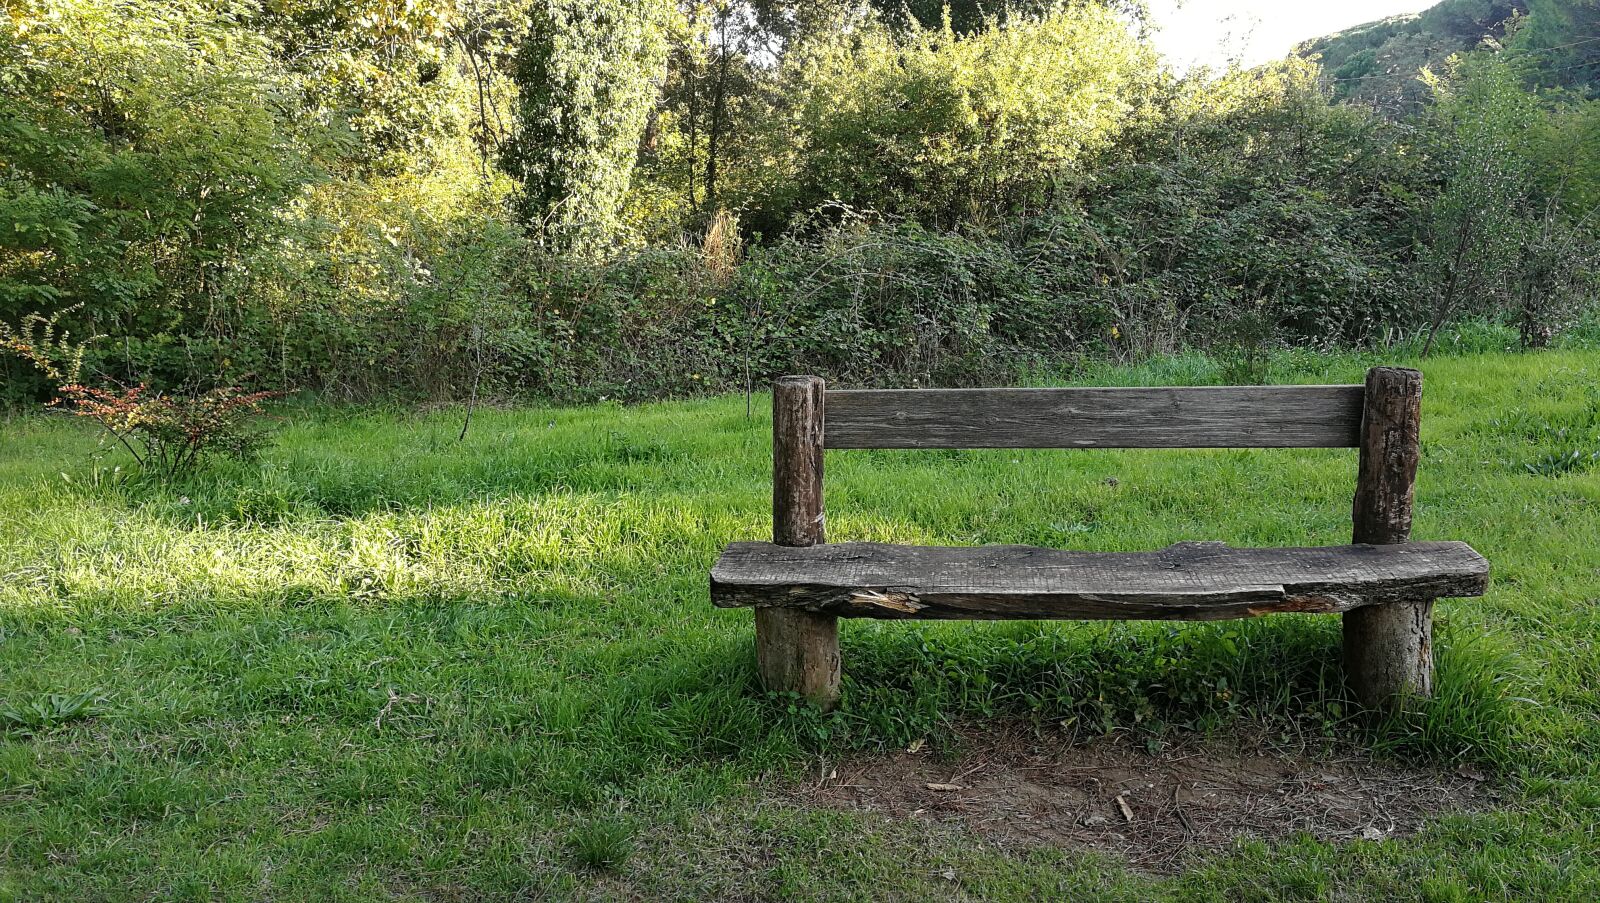 HUAWEI P10 sample photo. Nature, bench, solitude photography